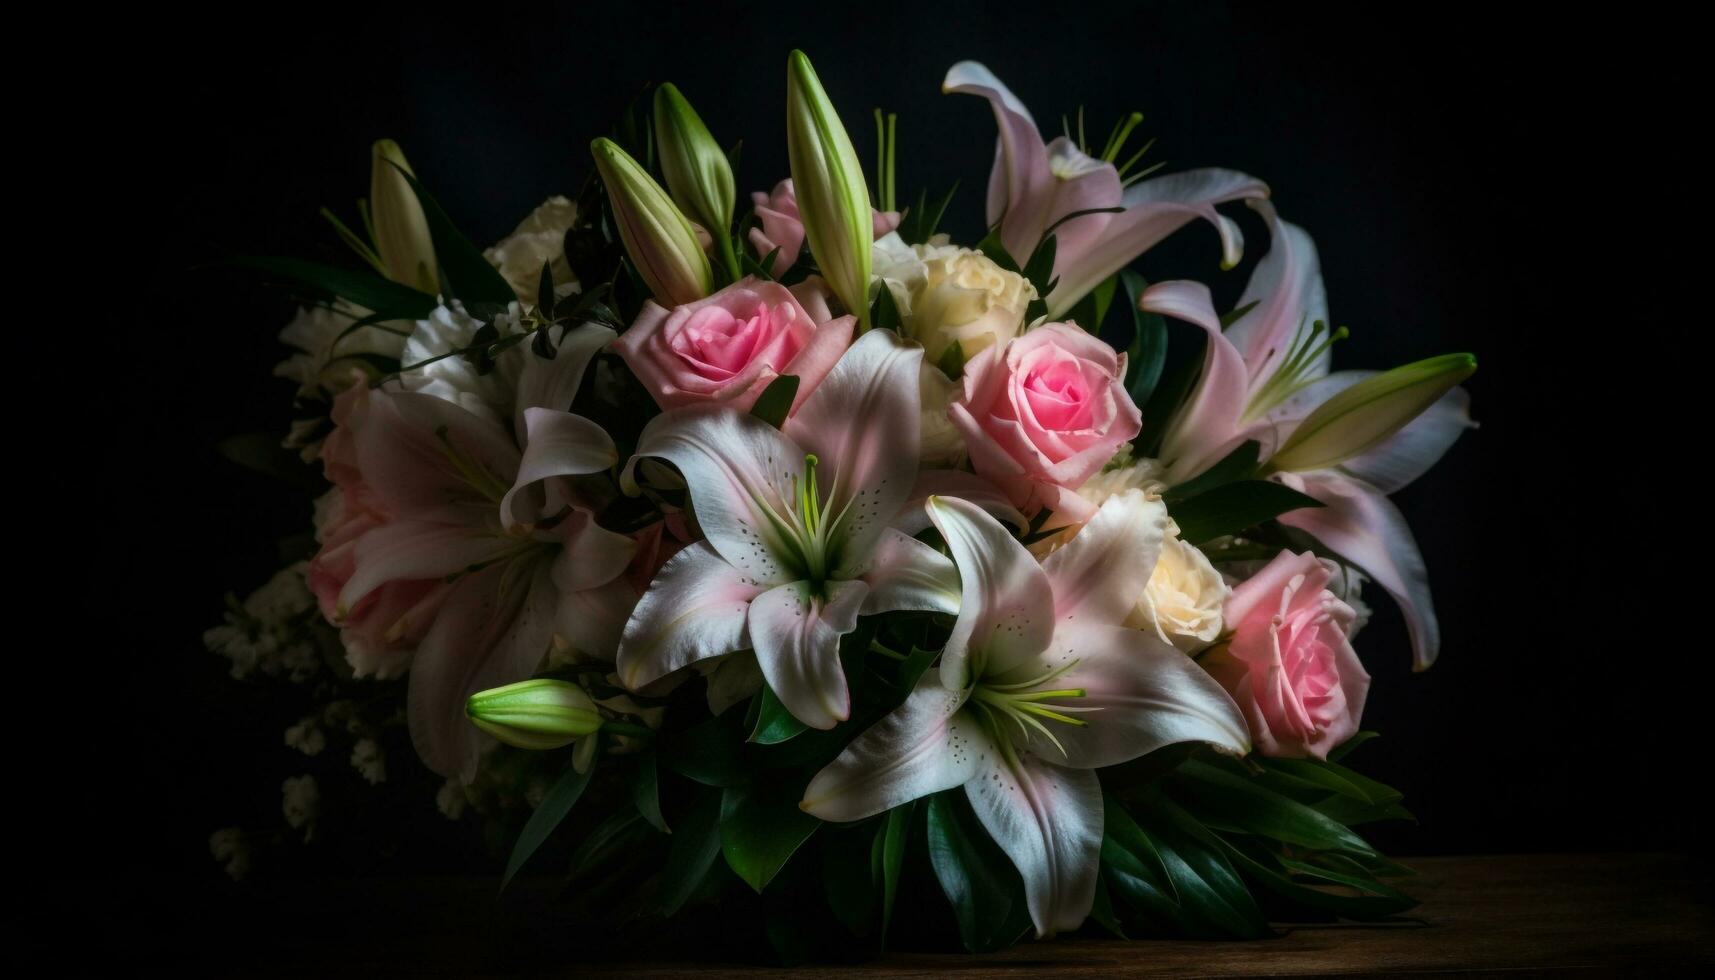 Nature beauty in a bouquet of fresh pink tulips and orchids generated by AI photo